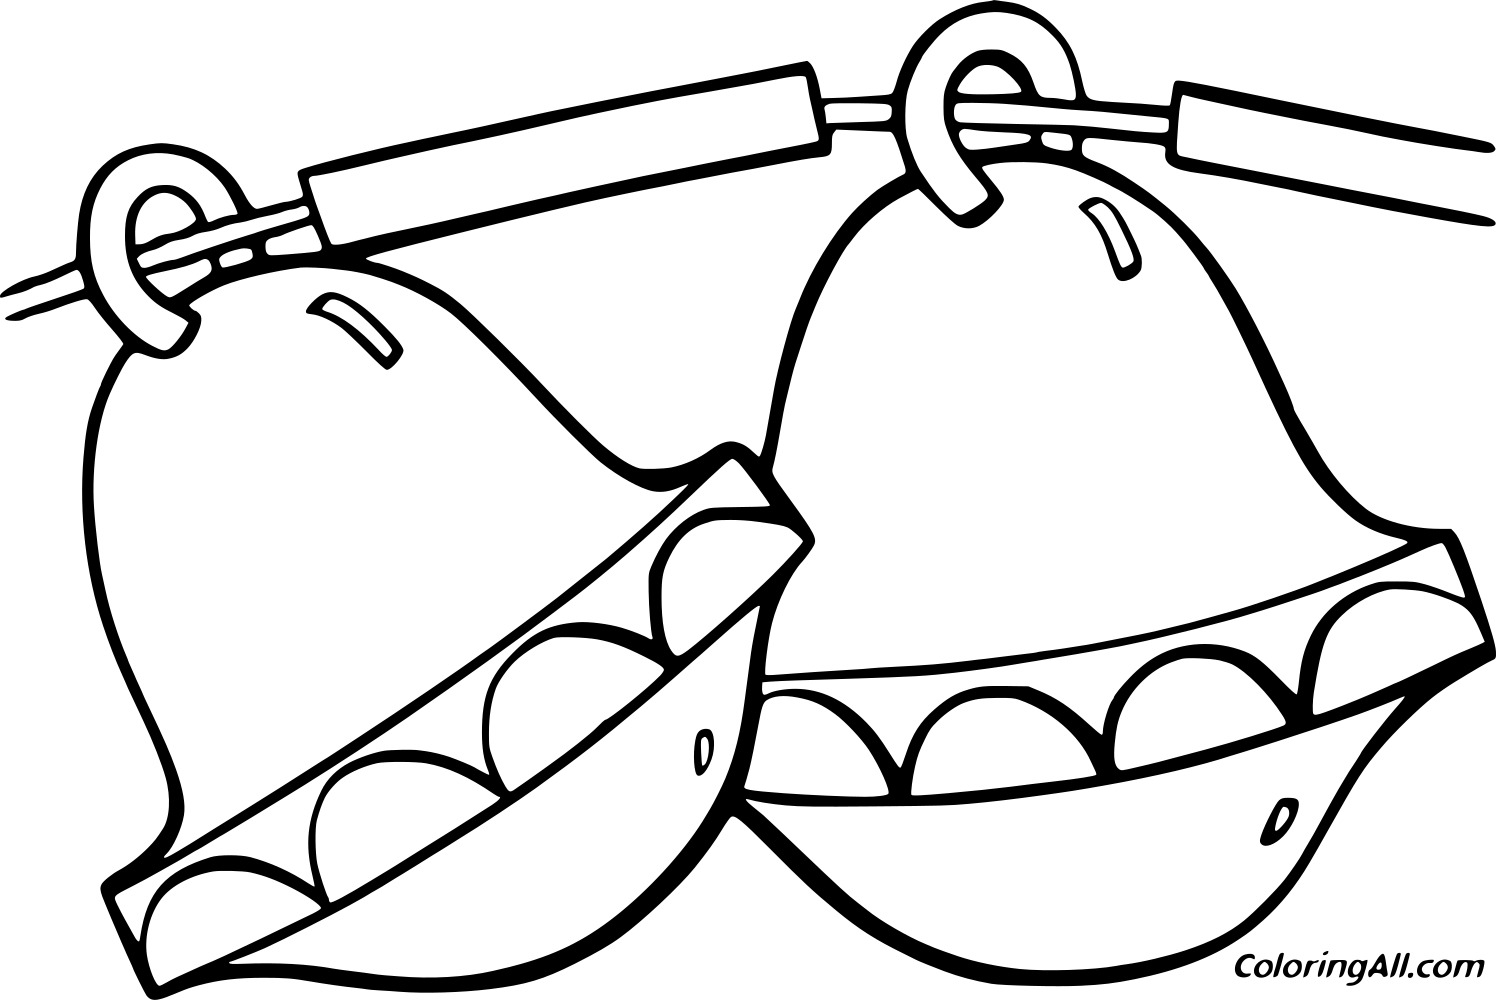 Jingle Bells On The Rope Image For Kids Coloring Page